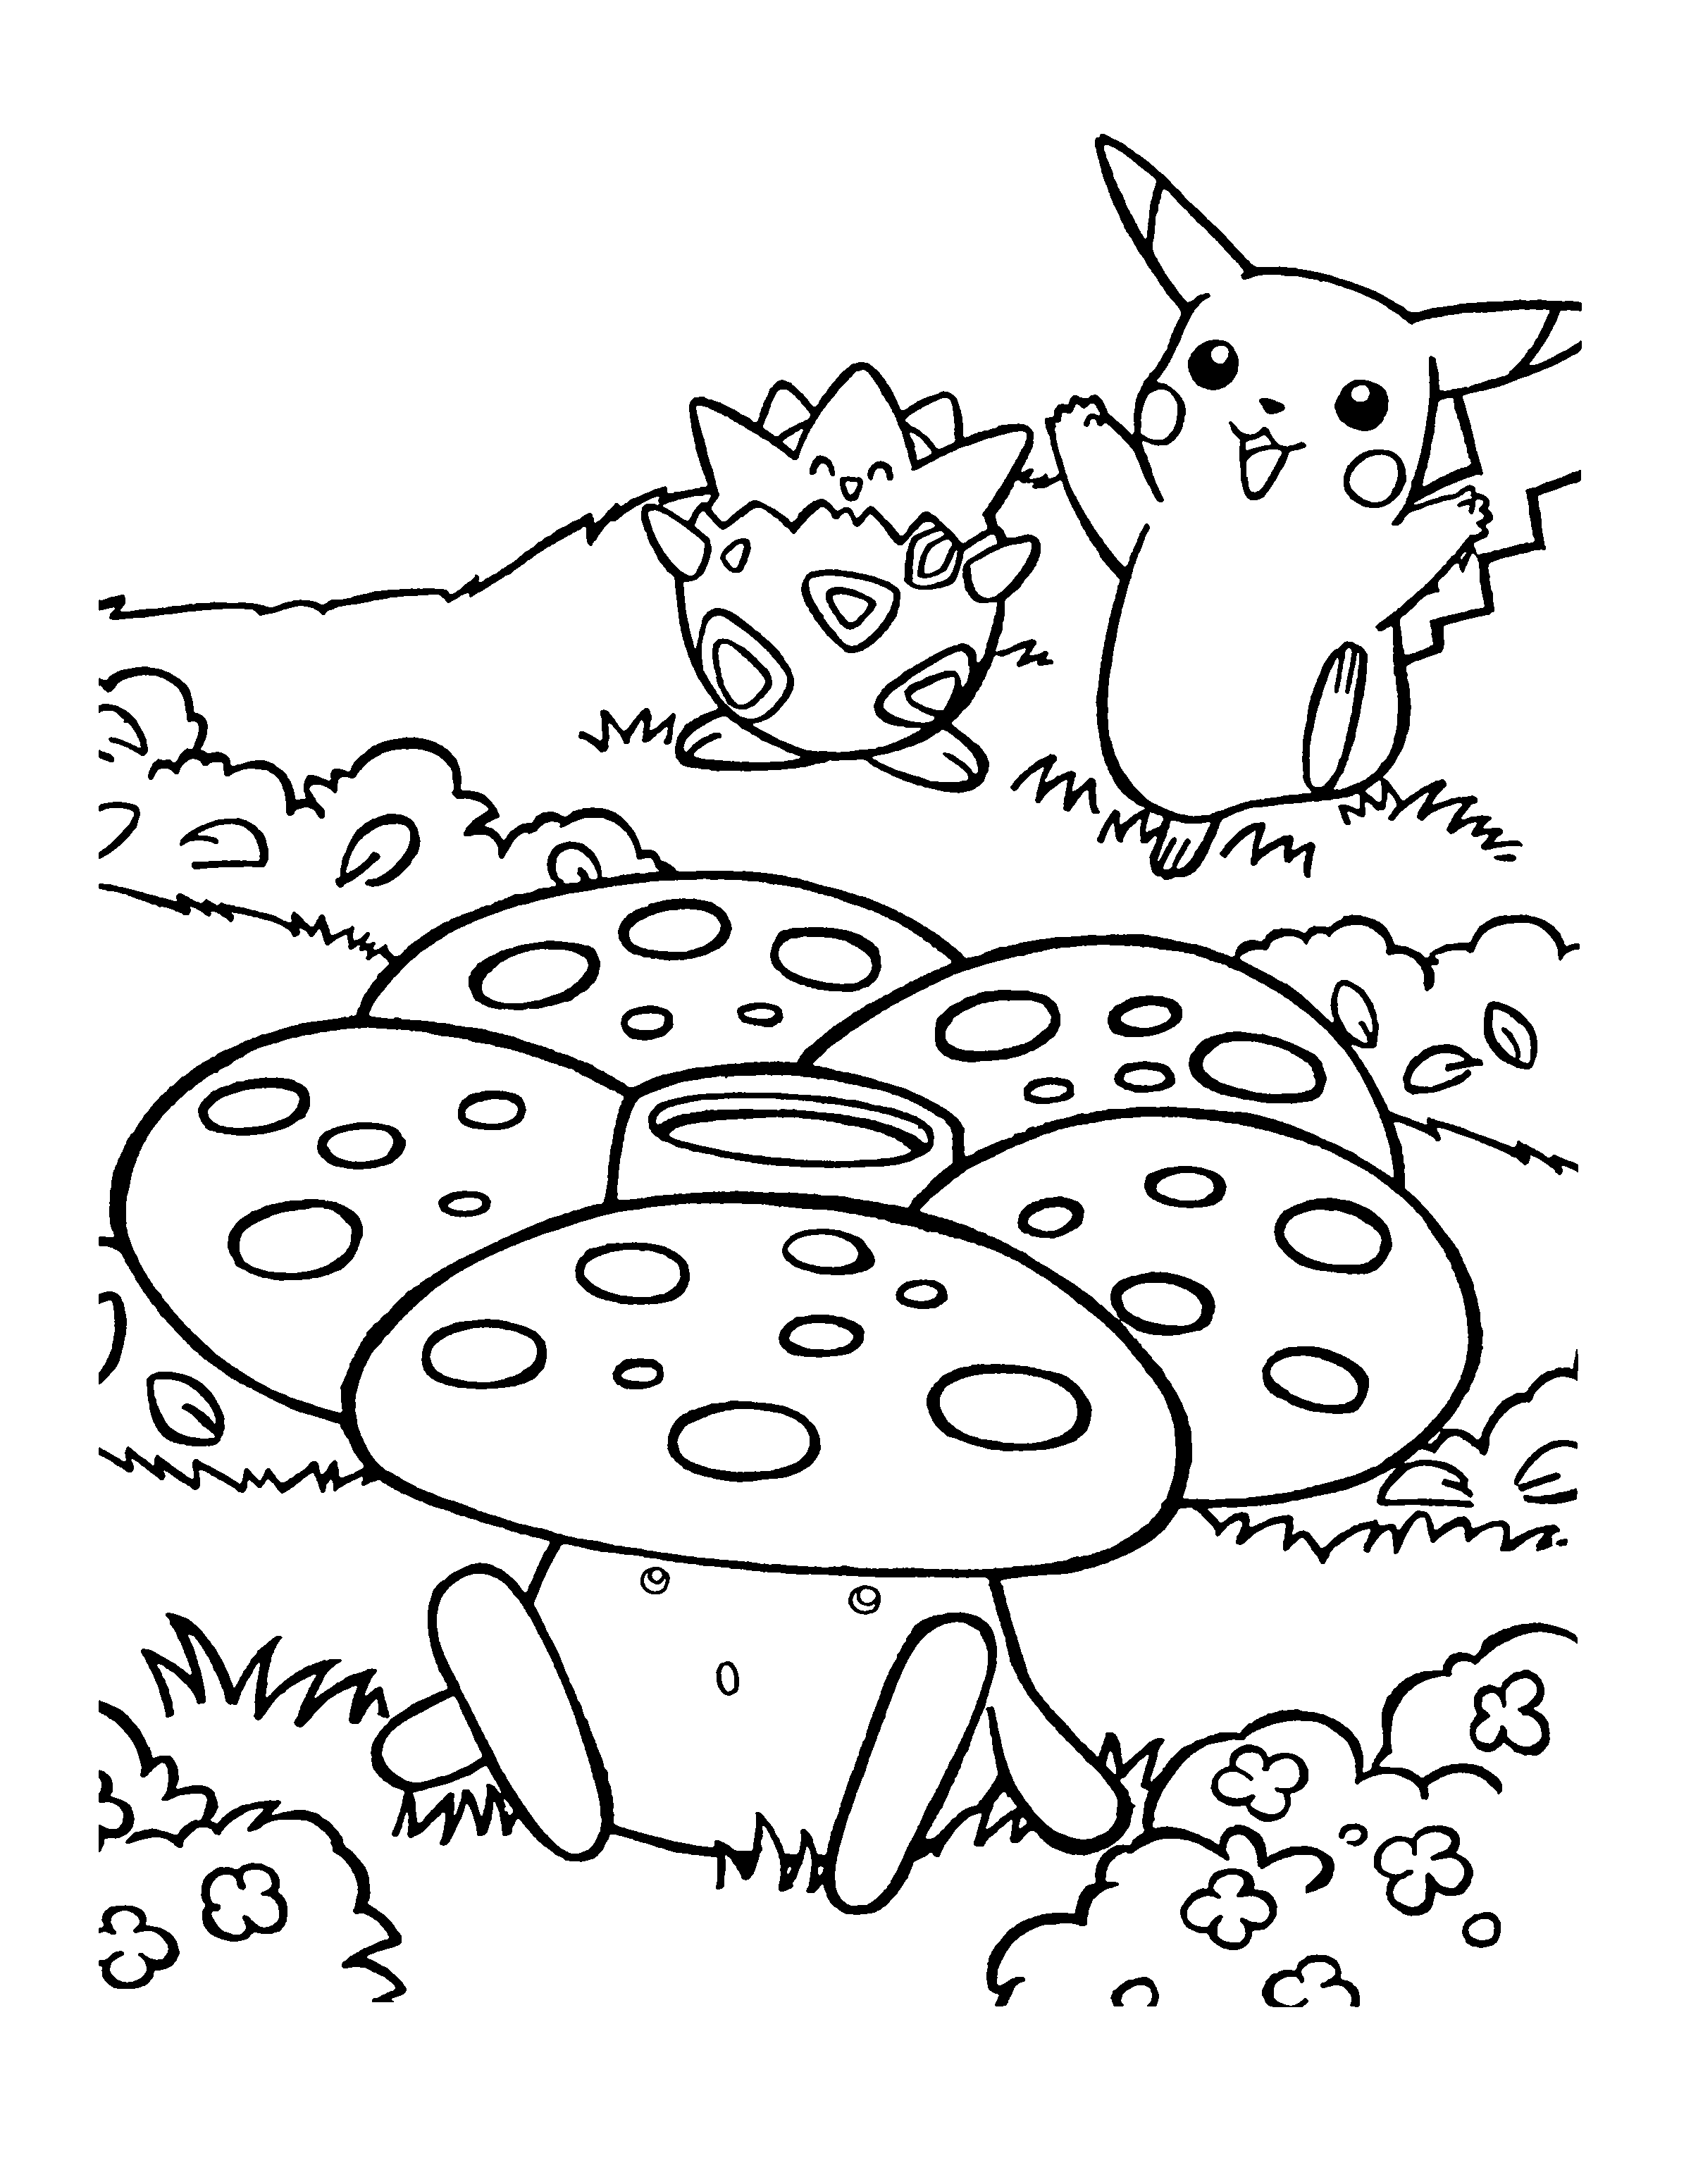 animated-coloring-pages-pokemon-image-0686